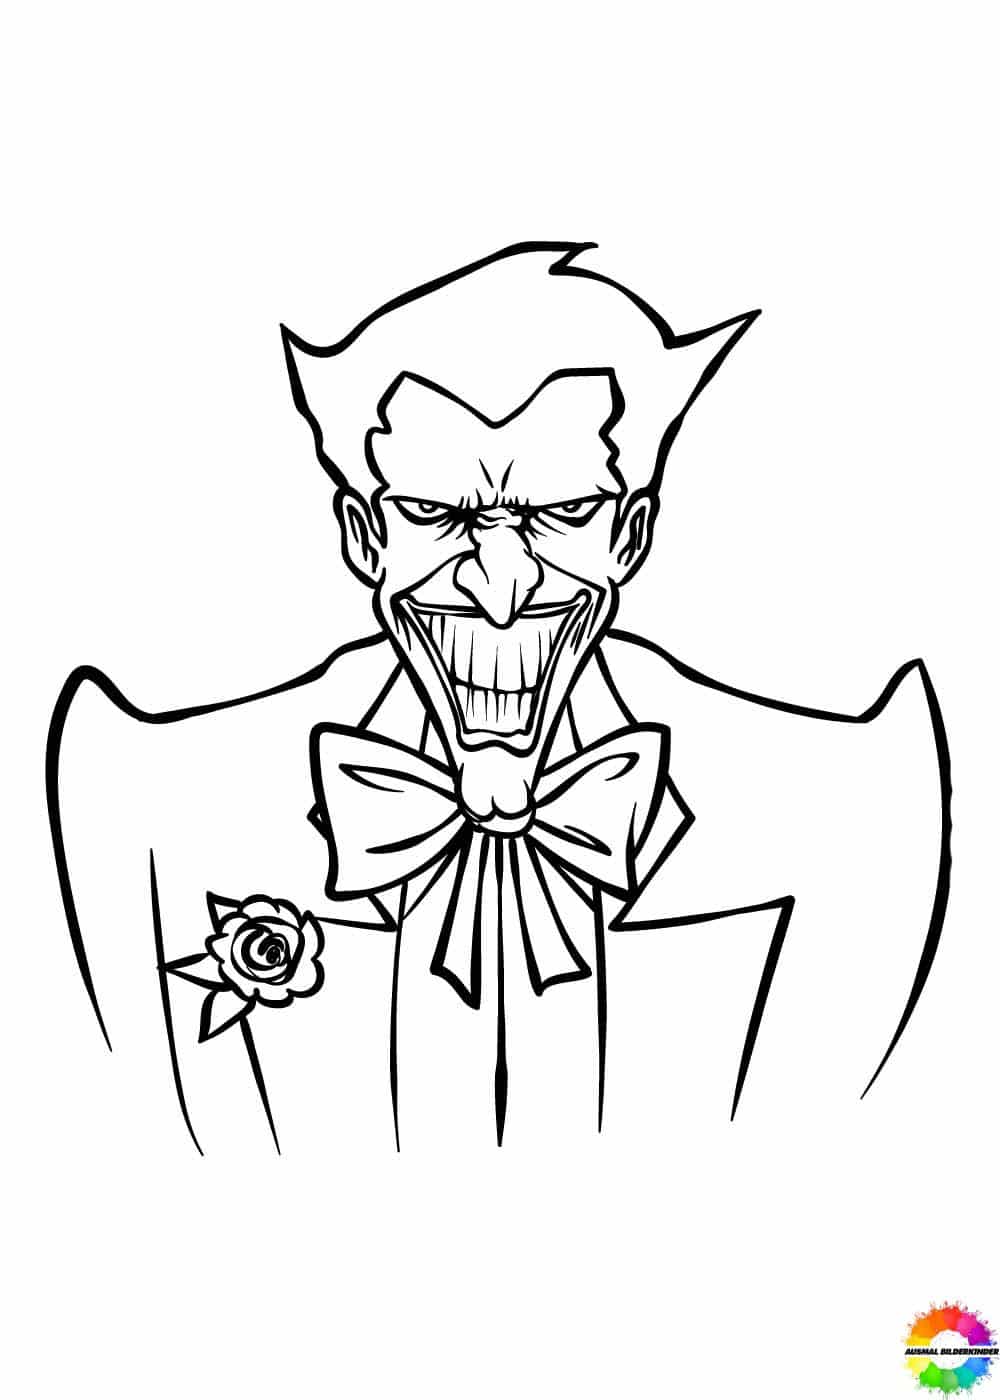 Joker free printable coloring pages for kids